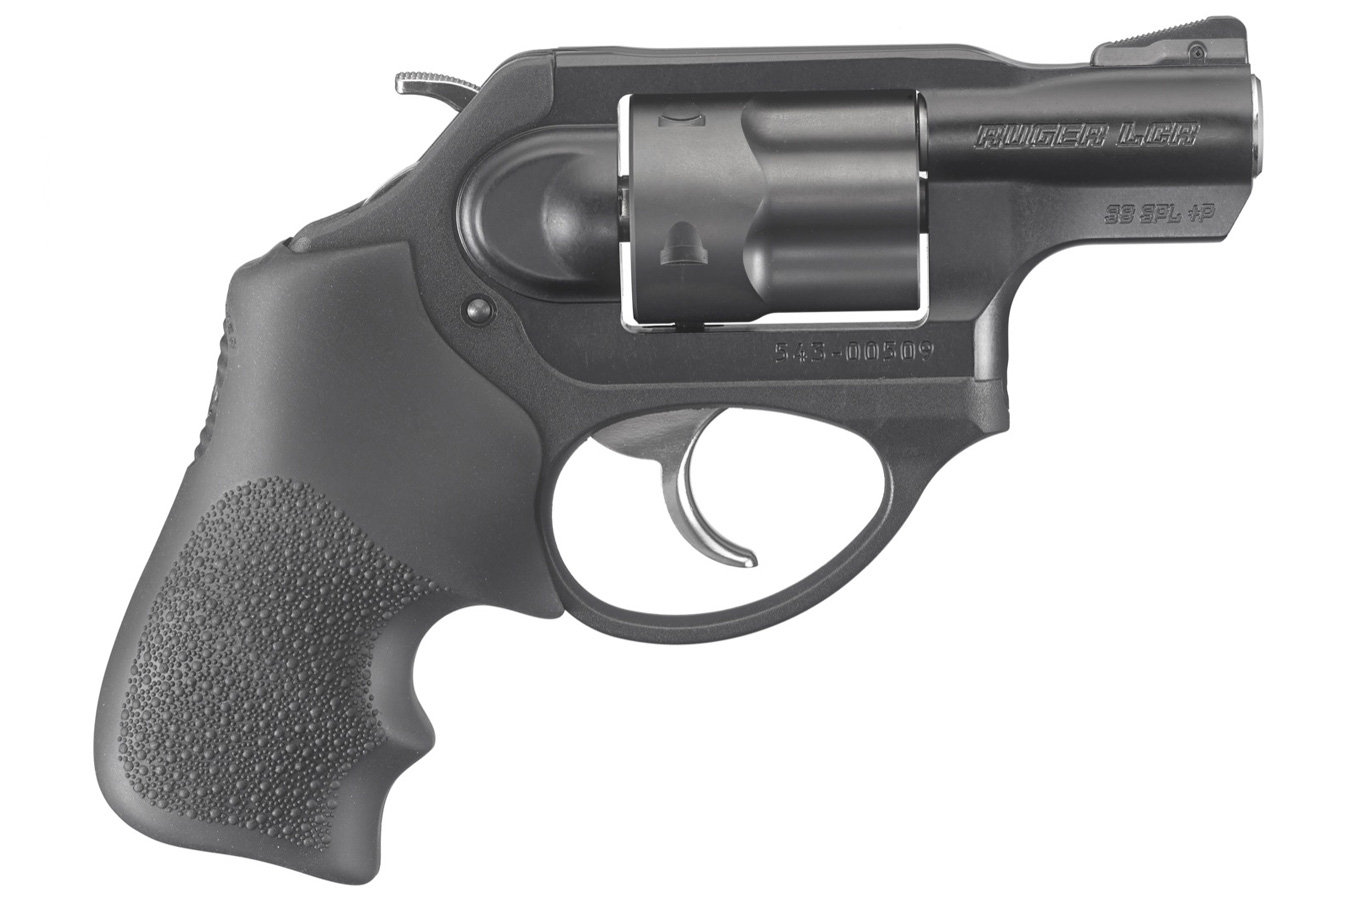 No. 16 Best Selling: RUGER LCR-X 38SPL DOUBLE ACTION REVOLVER